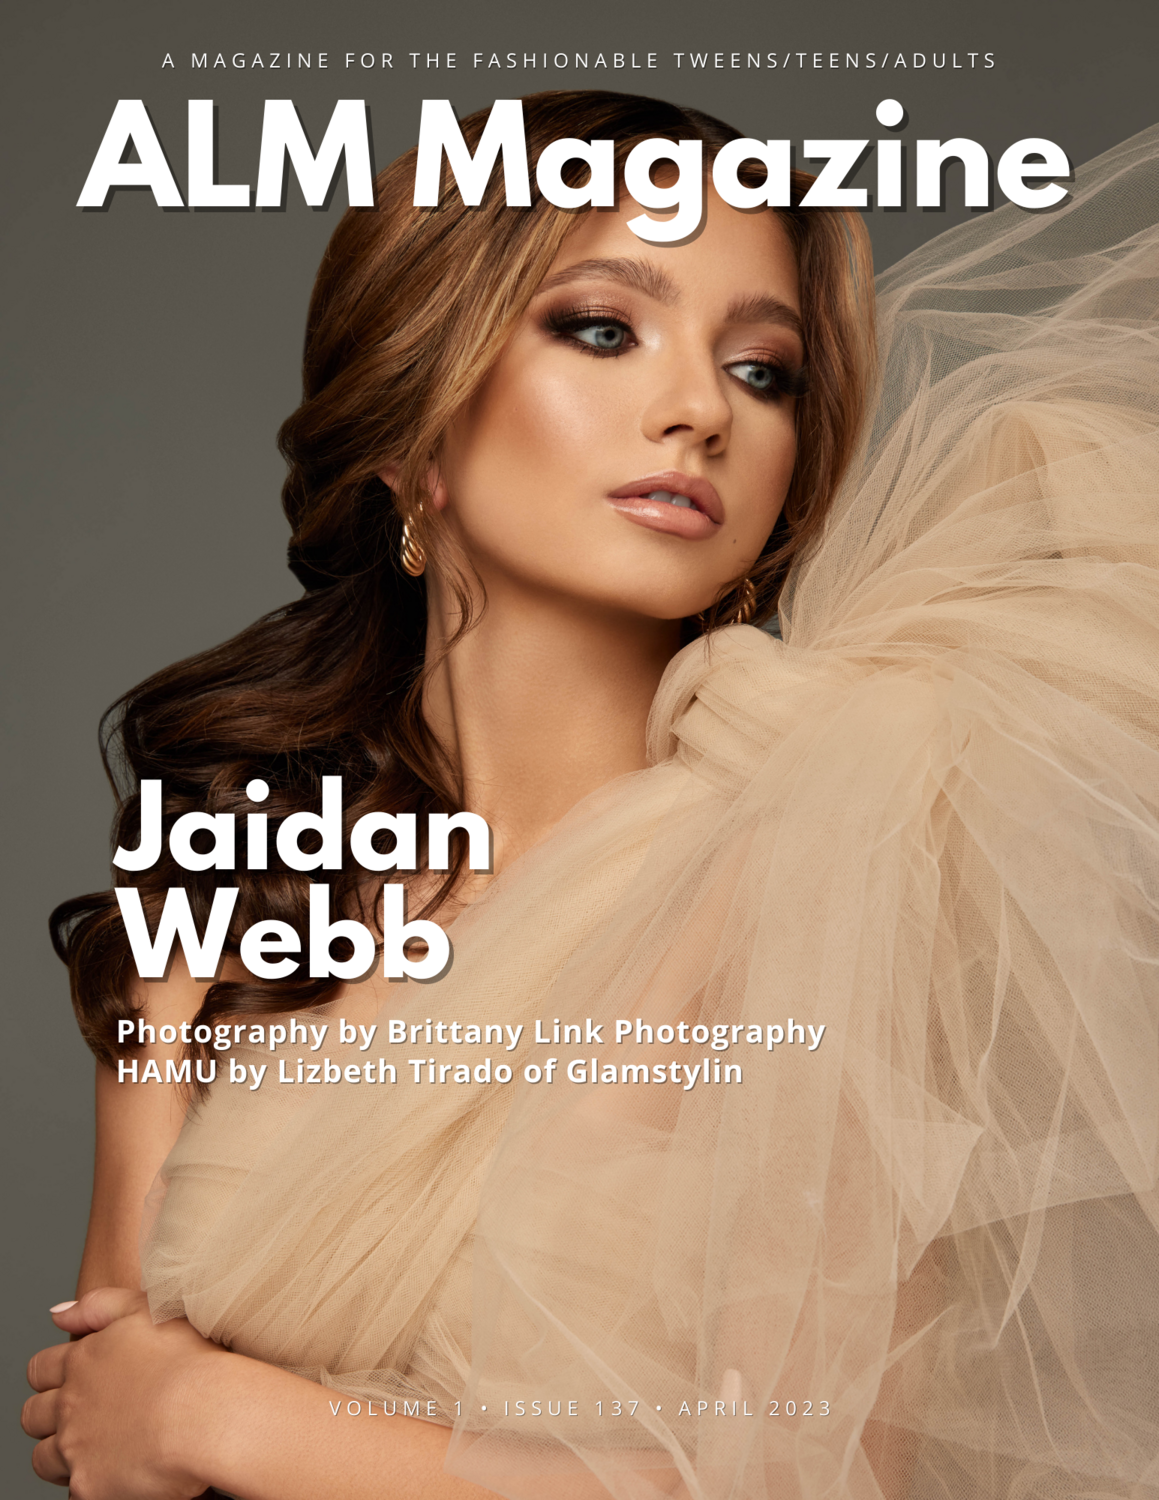 PRINT W/ DIGITAL ISSUE & PRINT CERTIFICATE- ALM Magazine, "Models of the Year", March 2023, Issue #137